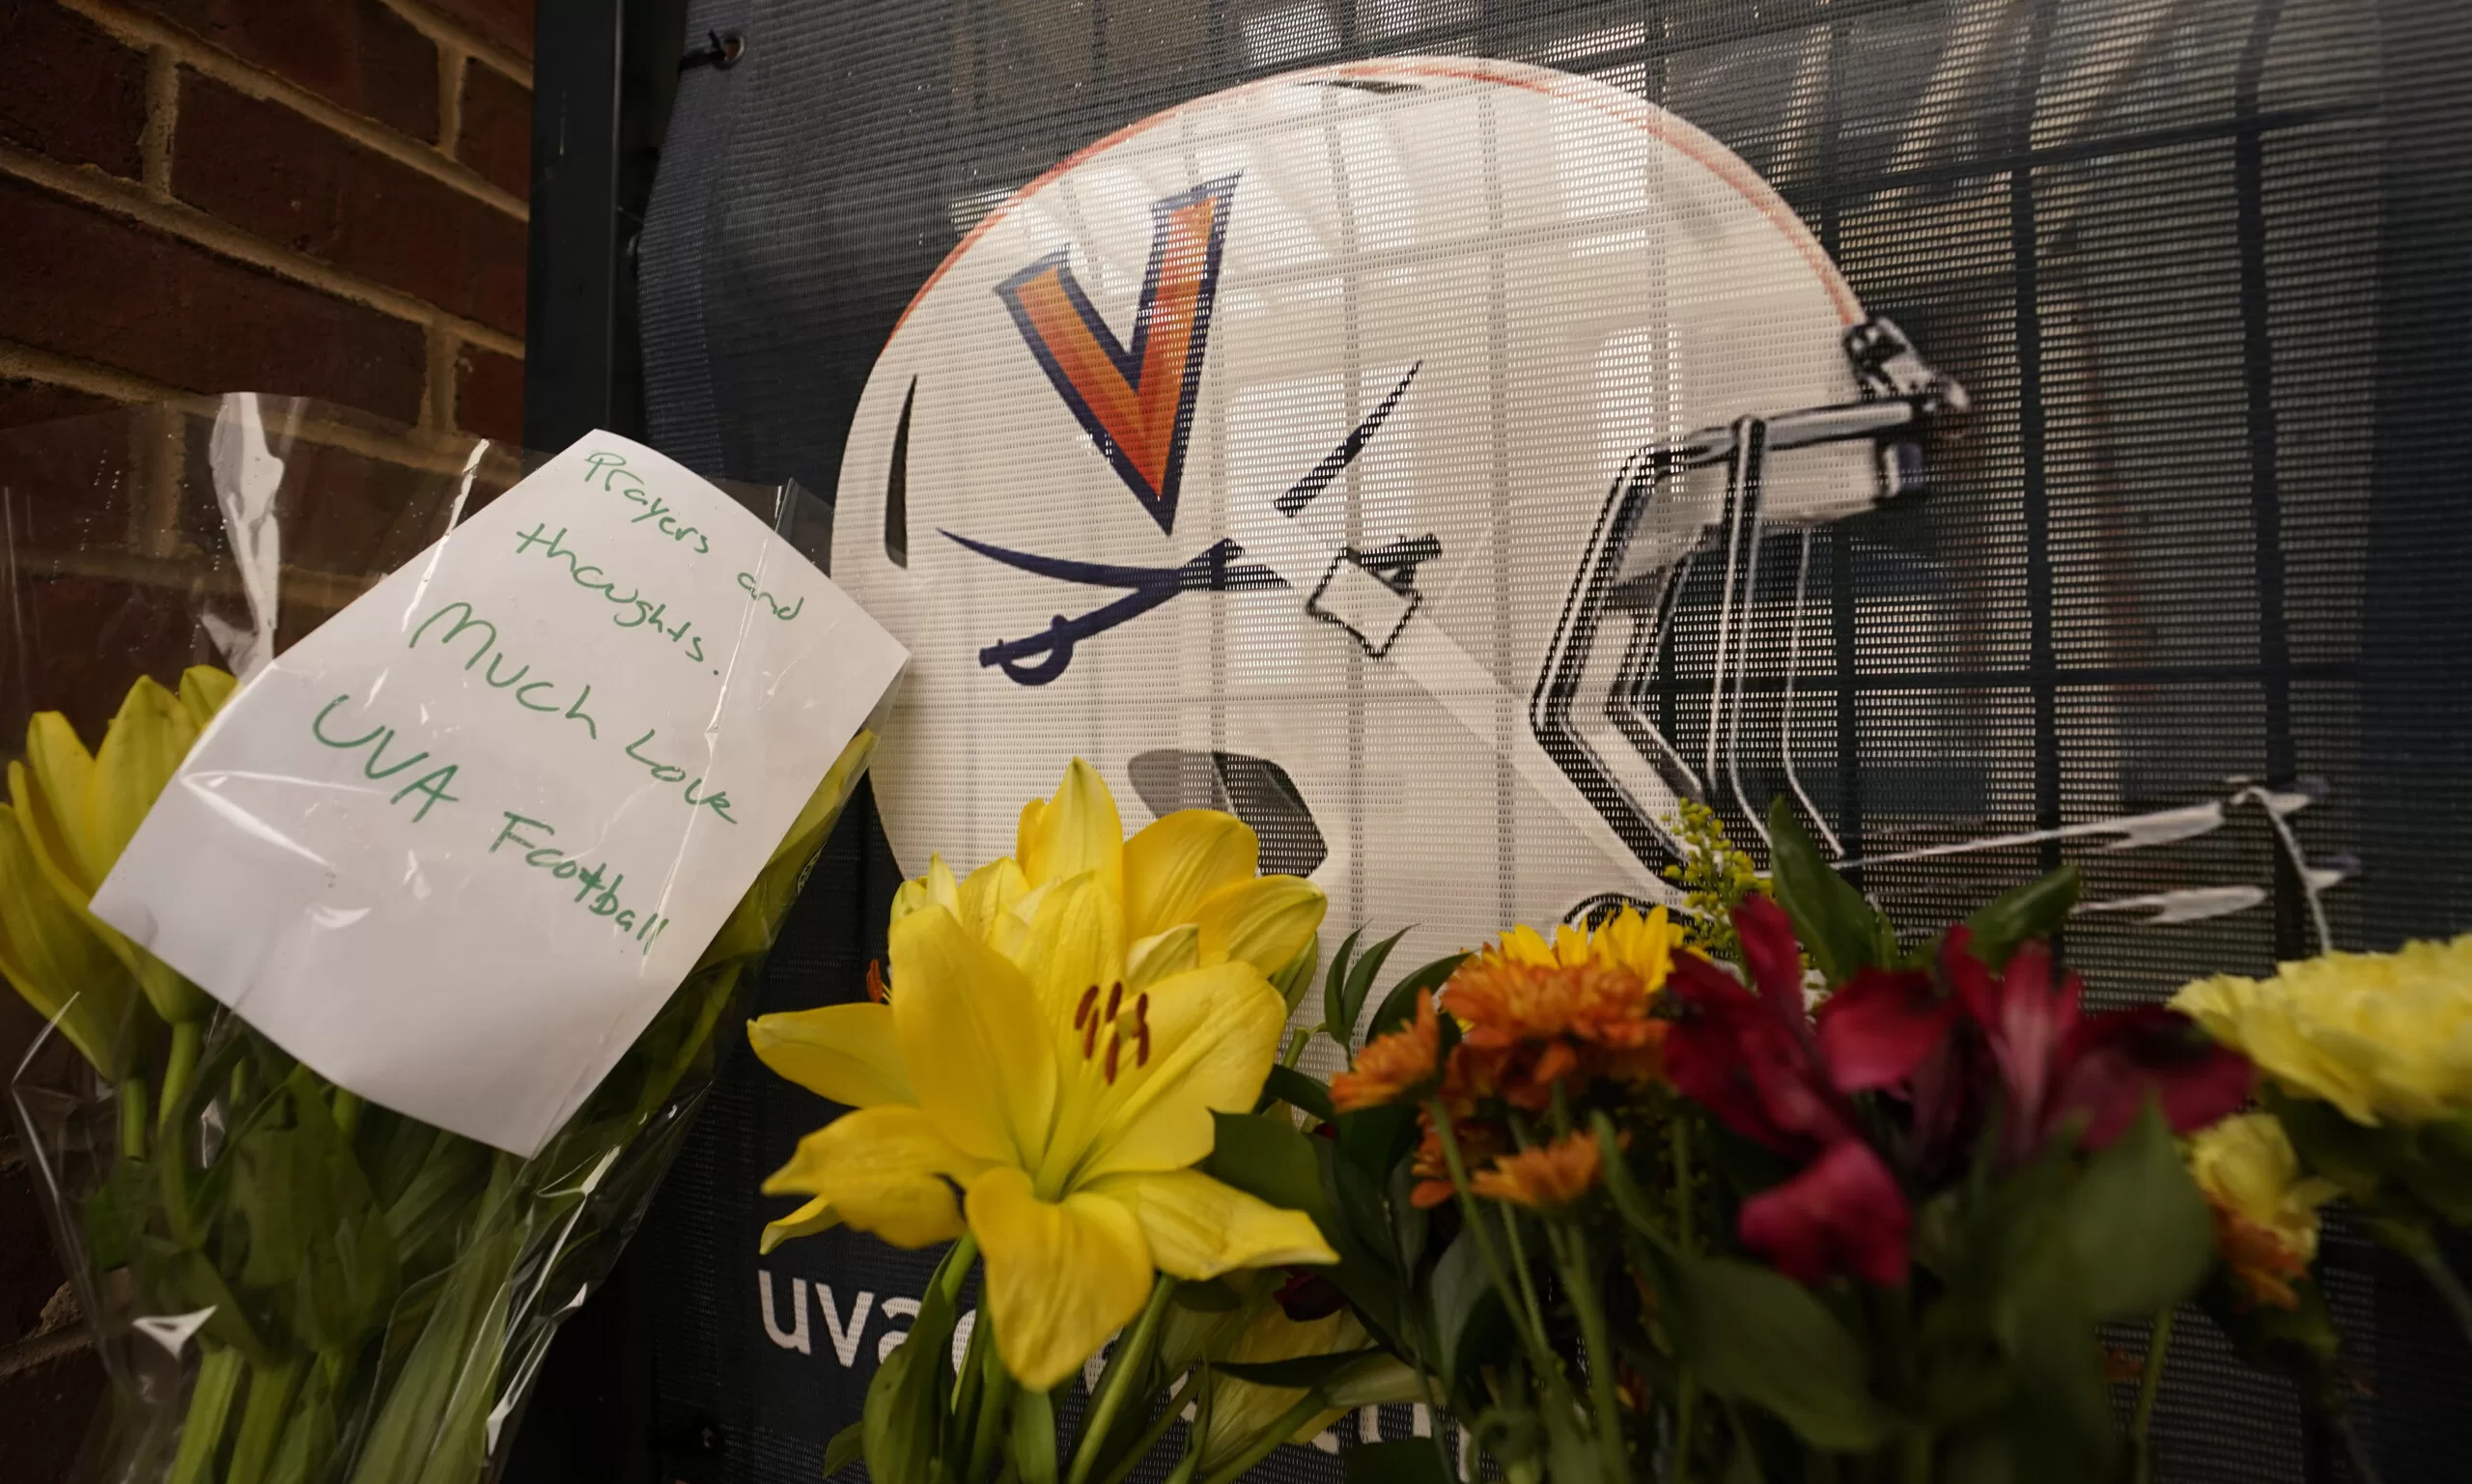 Virginia determined to honor the legacies of slain teammates as it returns to the field
